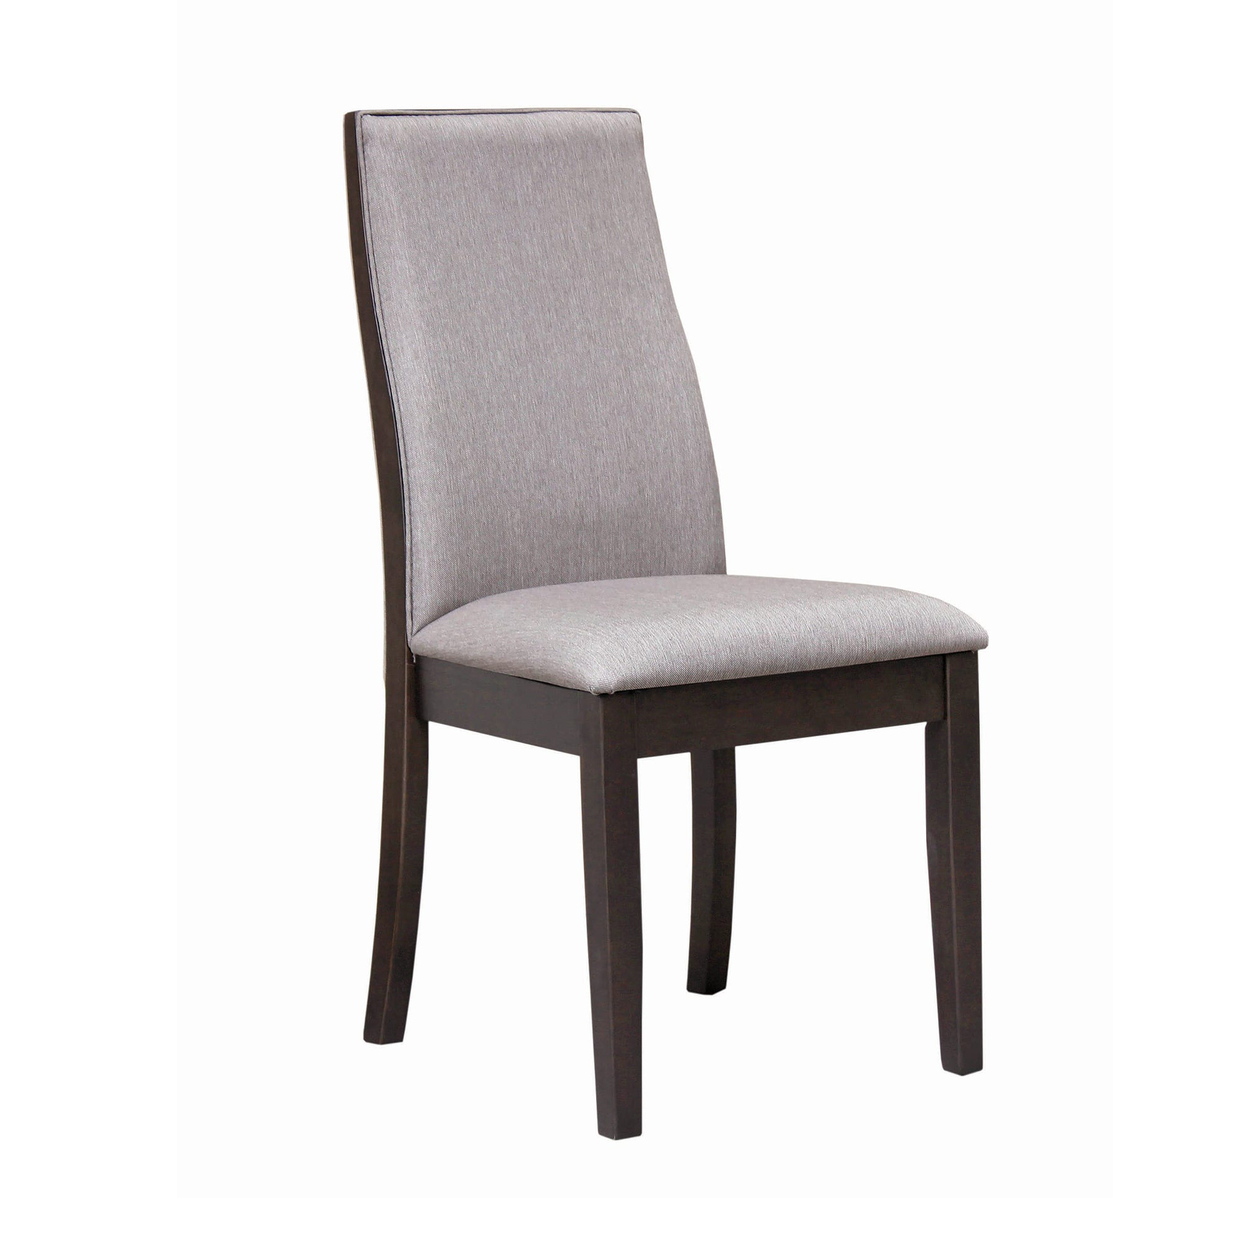 Fabric Upholstered Wooden Dining Chair, Set Of 2, Gray And Brown- Saltoro Sherpi